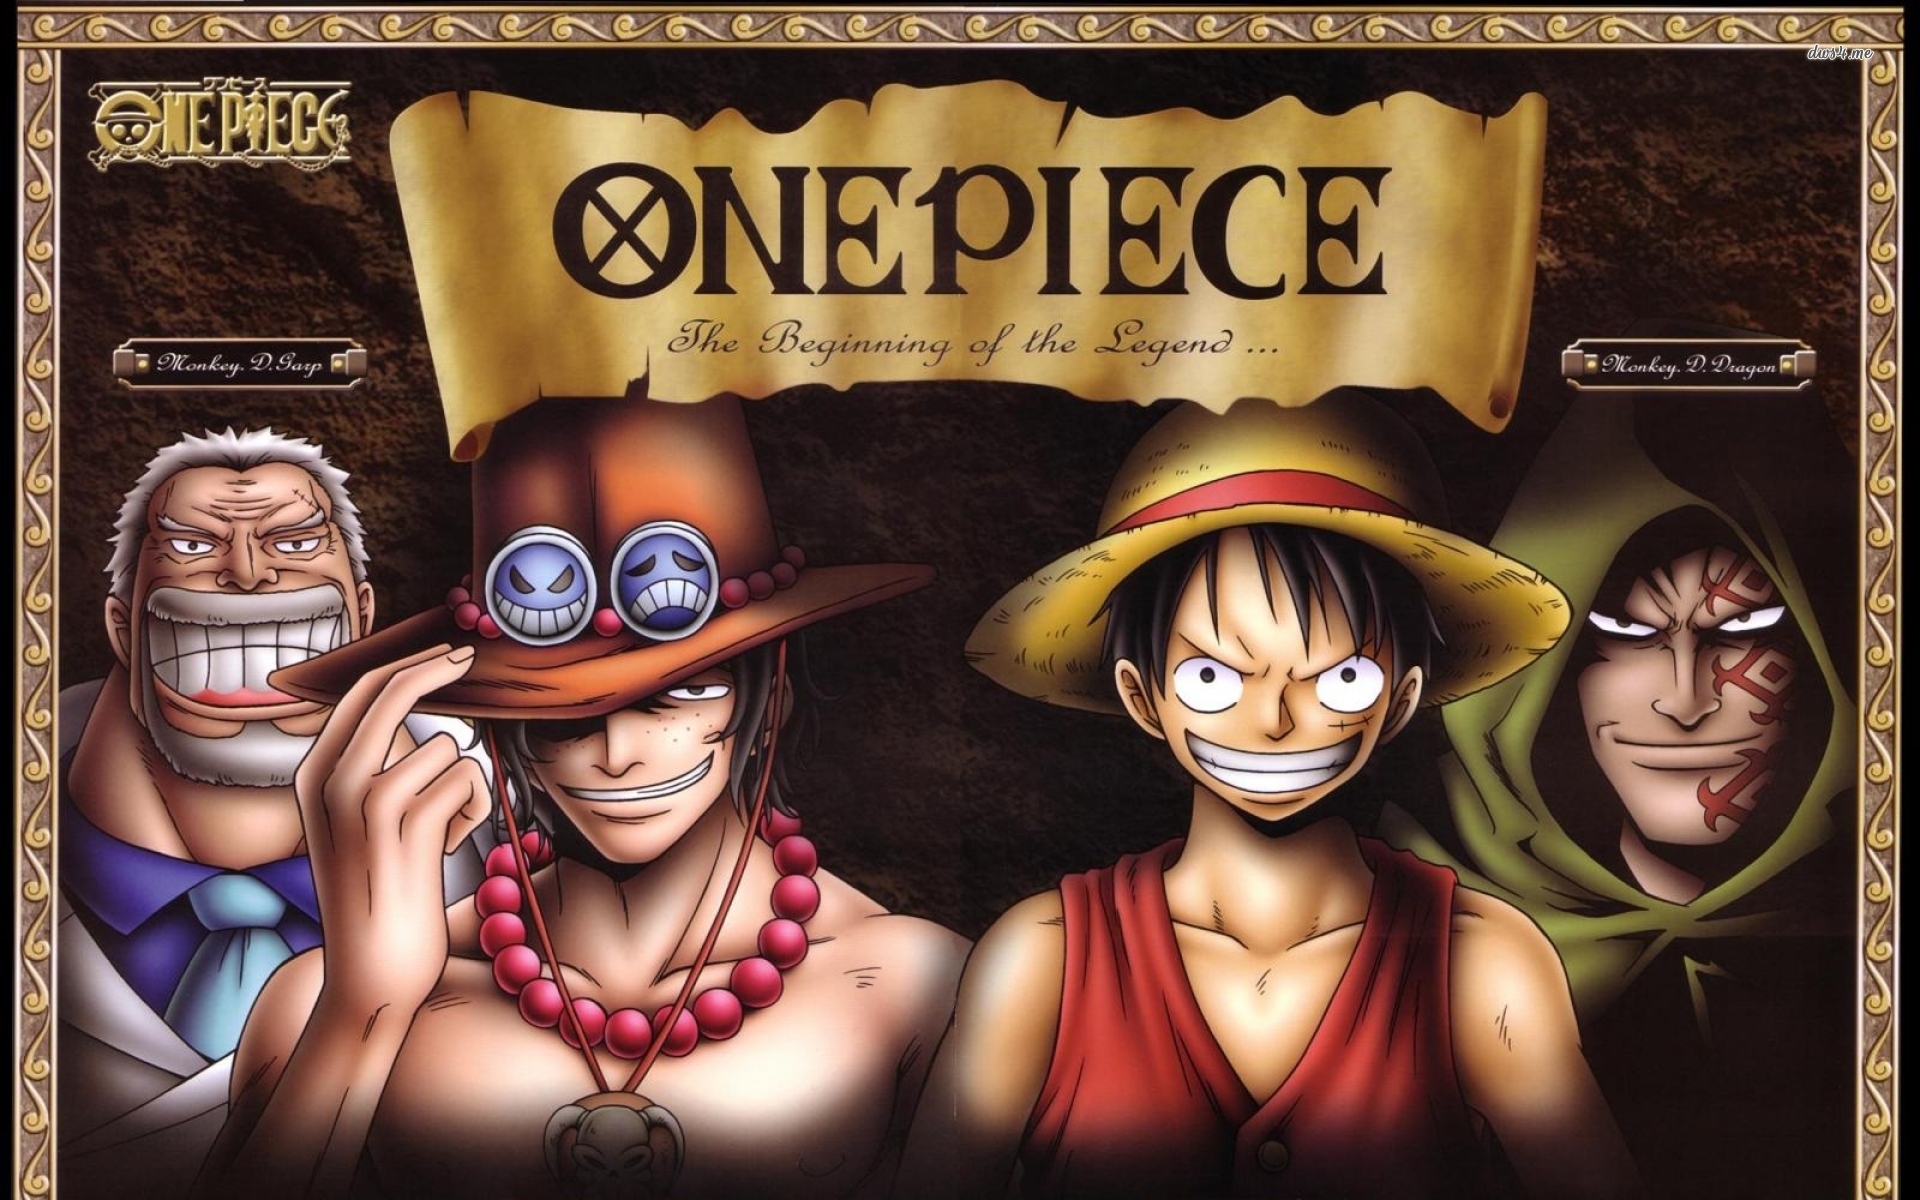 One Piece Wallpaper HD free dowload | Wallpapers, Backgrounds ...